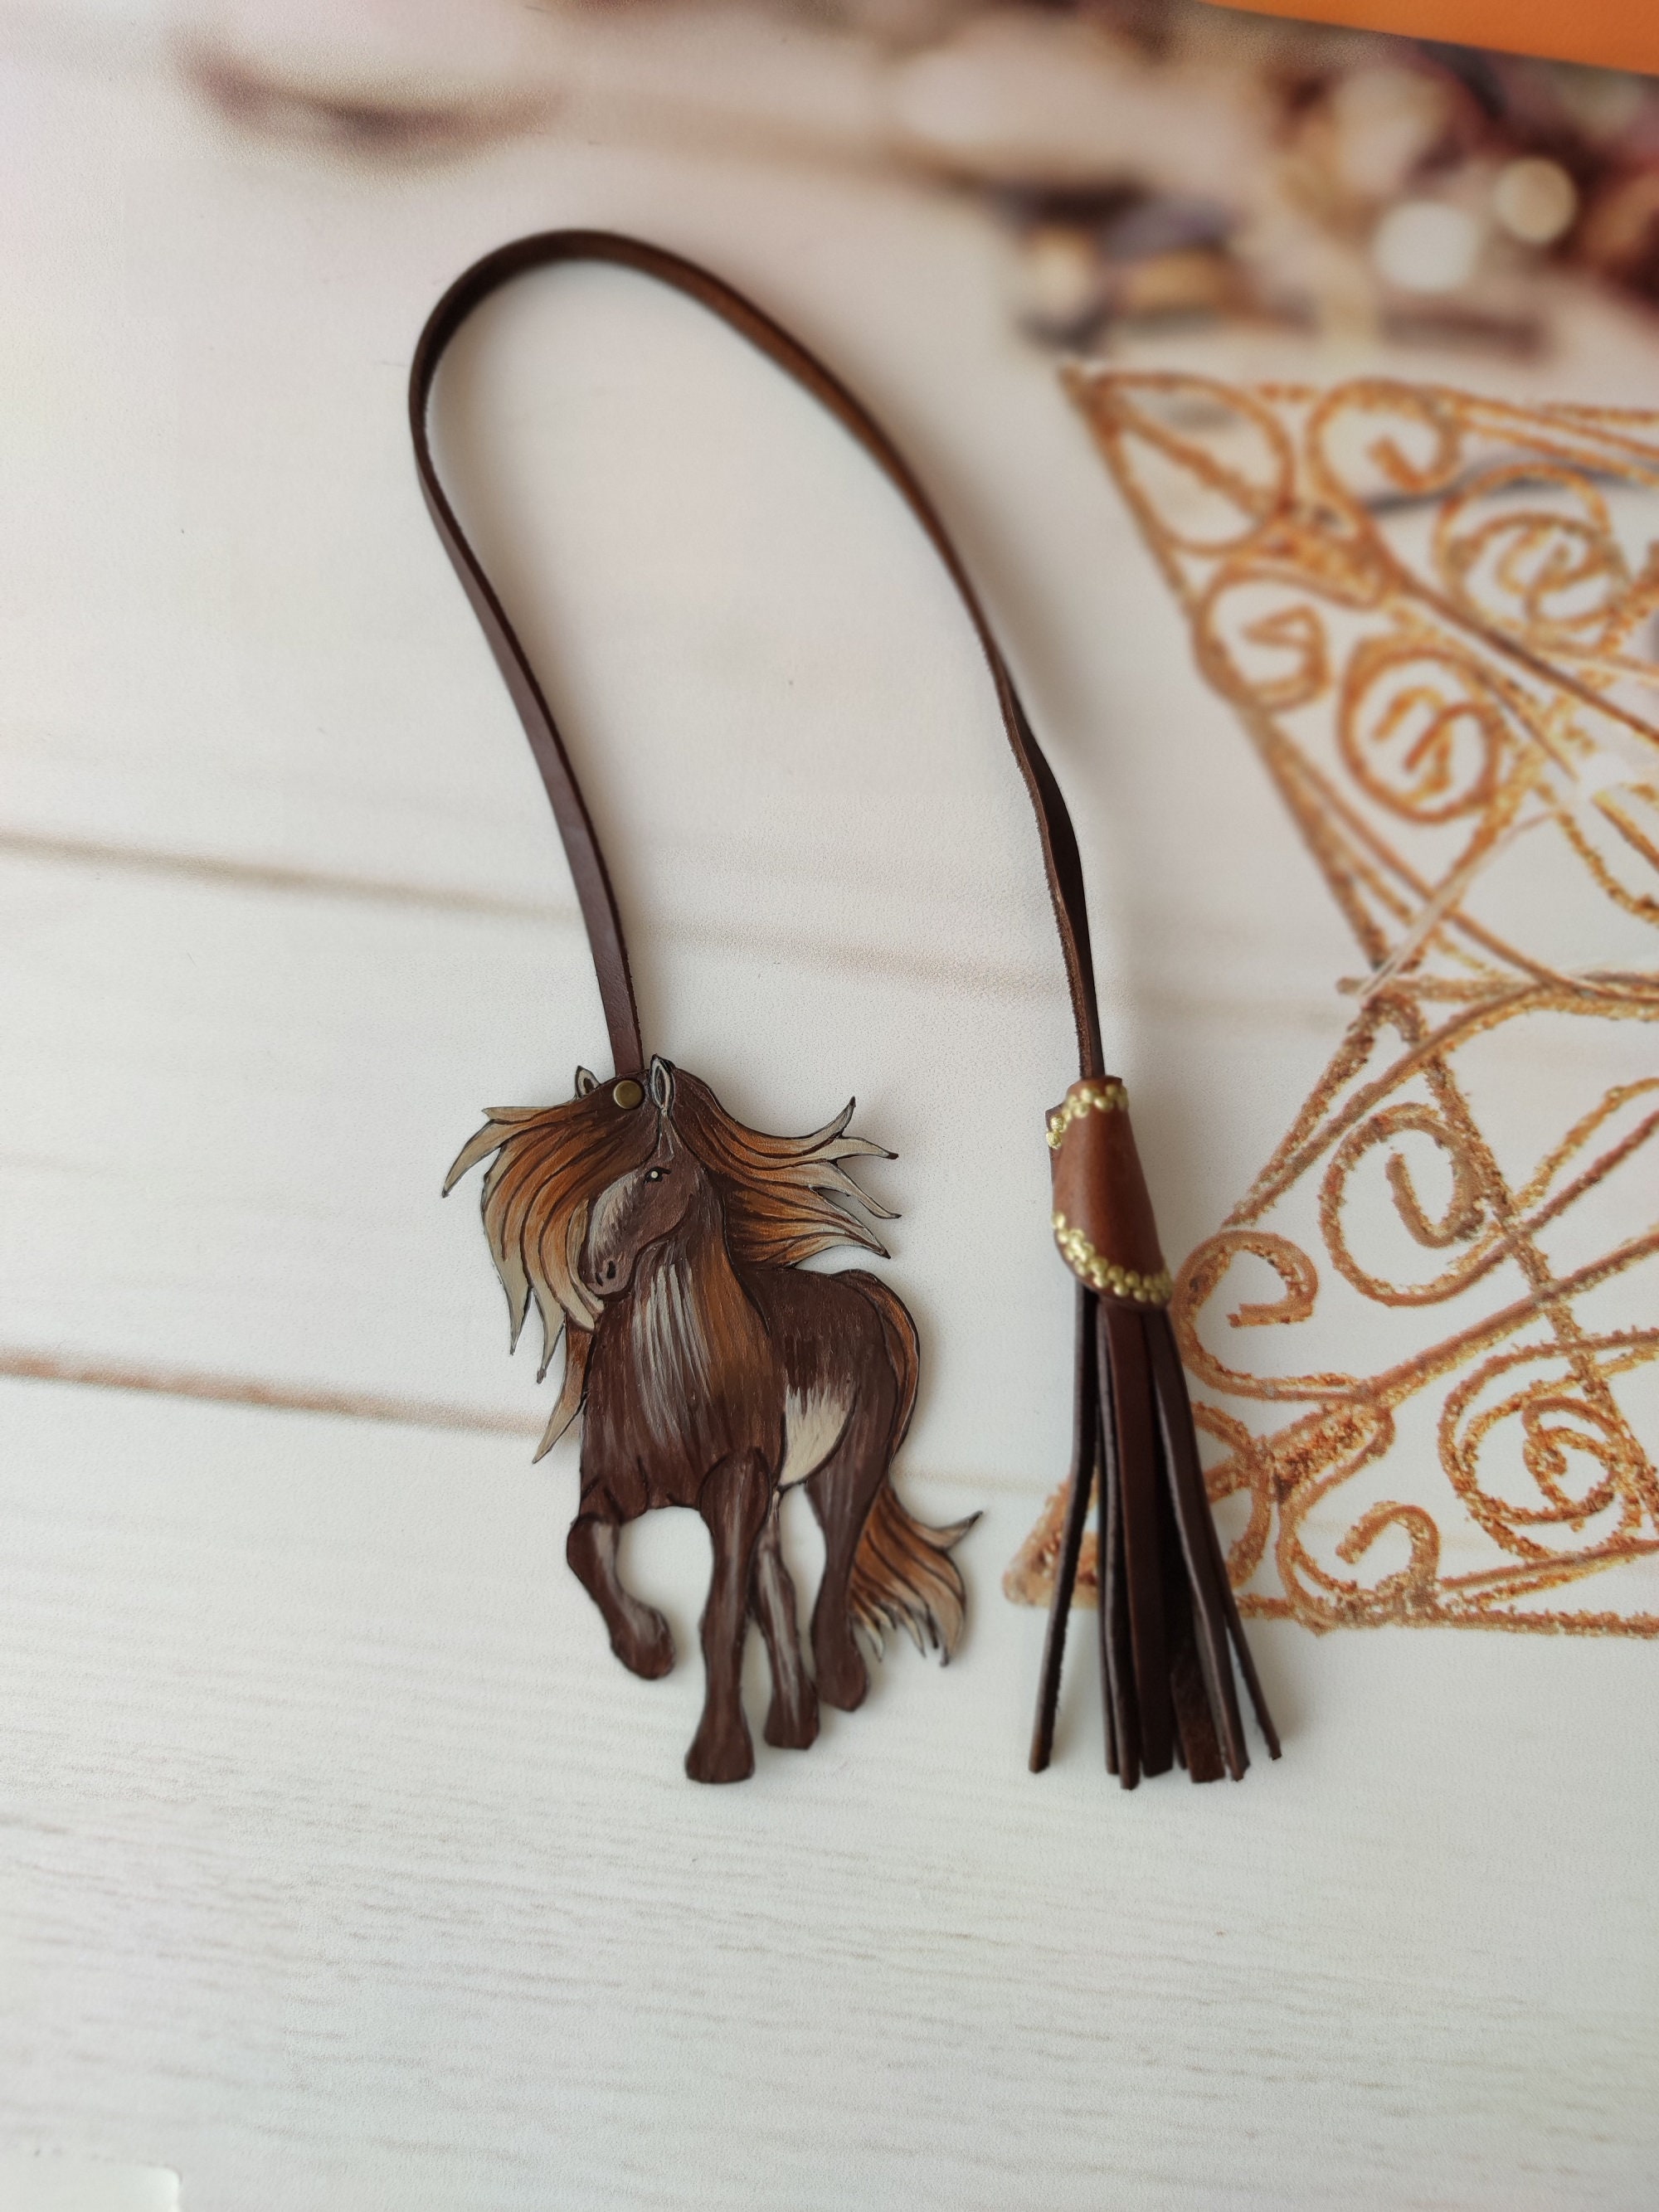 BestLeatherGifts Horse Leather Bag Charm